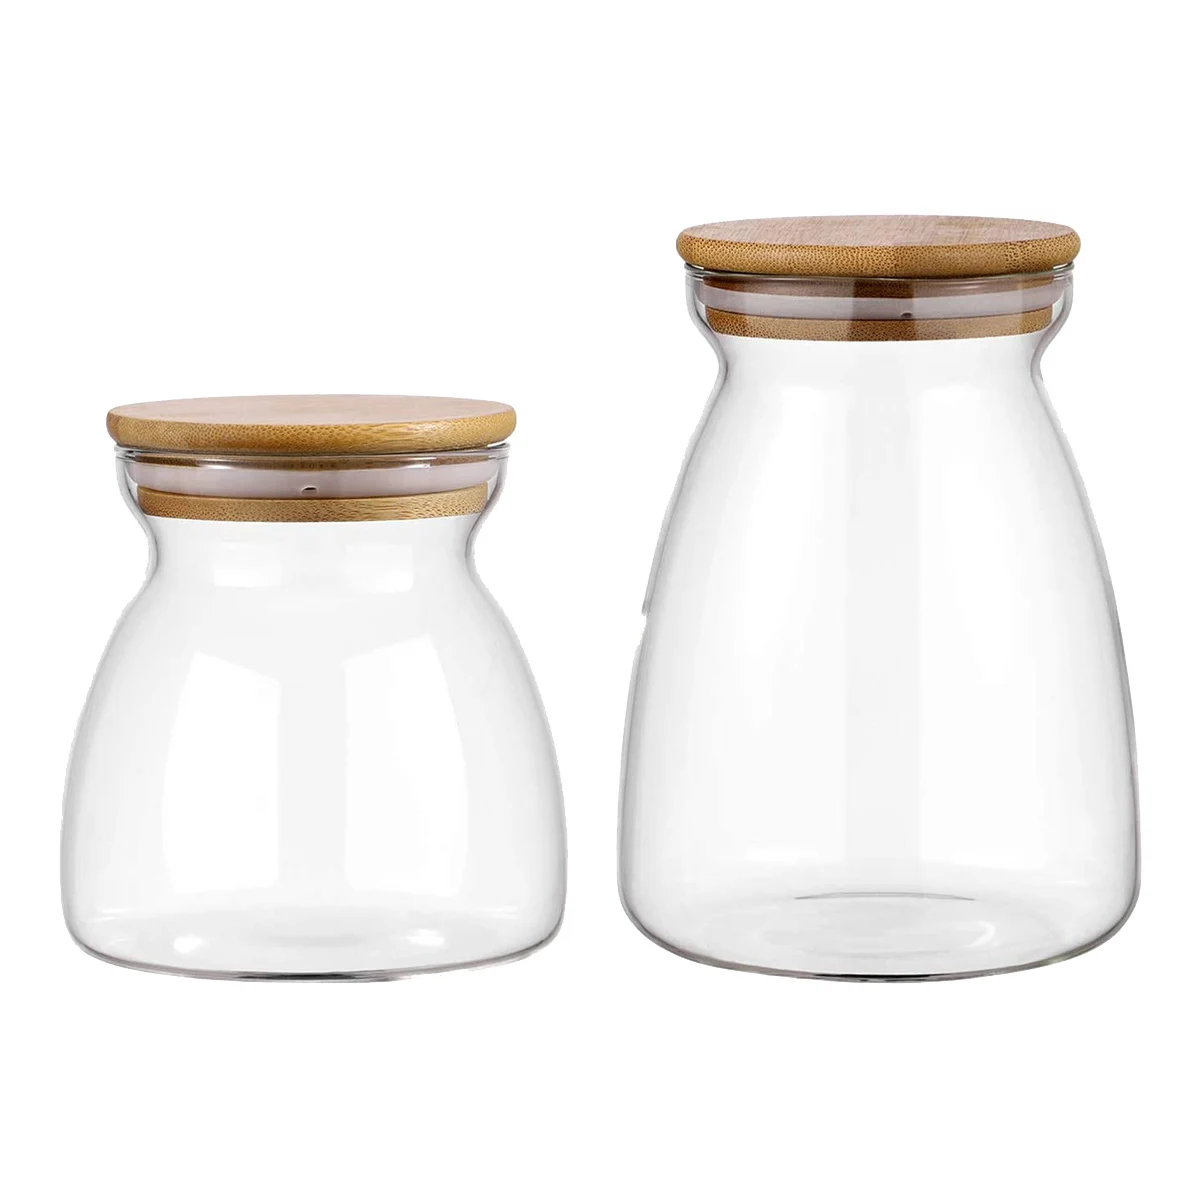 

2 Pcs Airtight Clear Food Storage Jar Container with Bamboo Lid (27Oz/800Ml), for Kitchen Tea Coffee Sugar Flour Spices